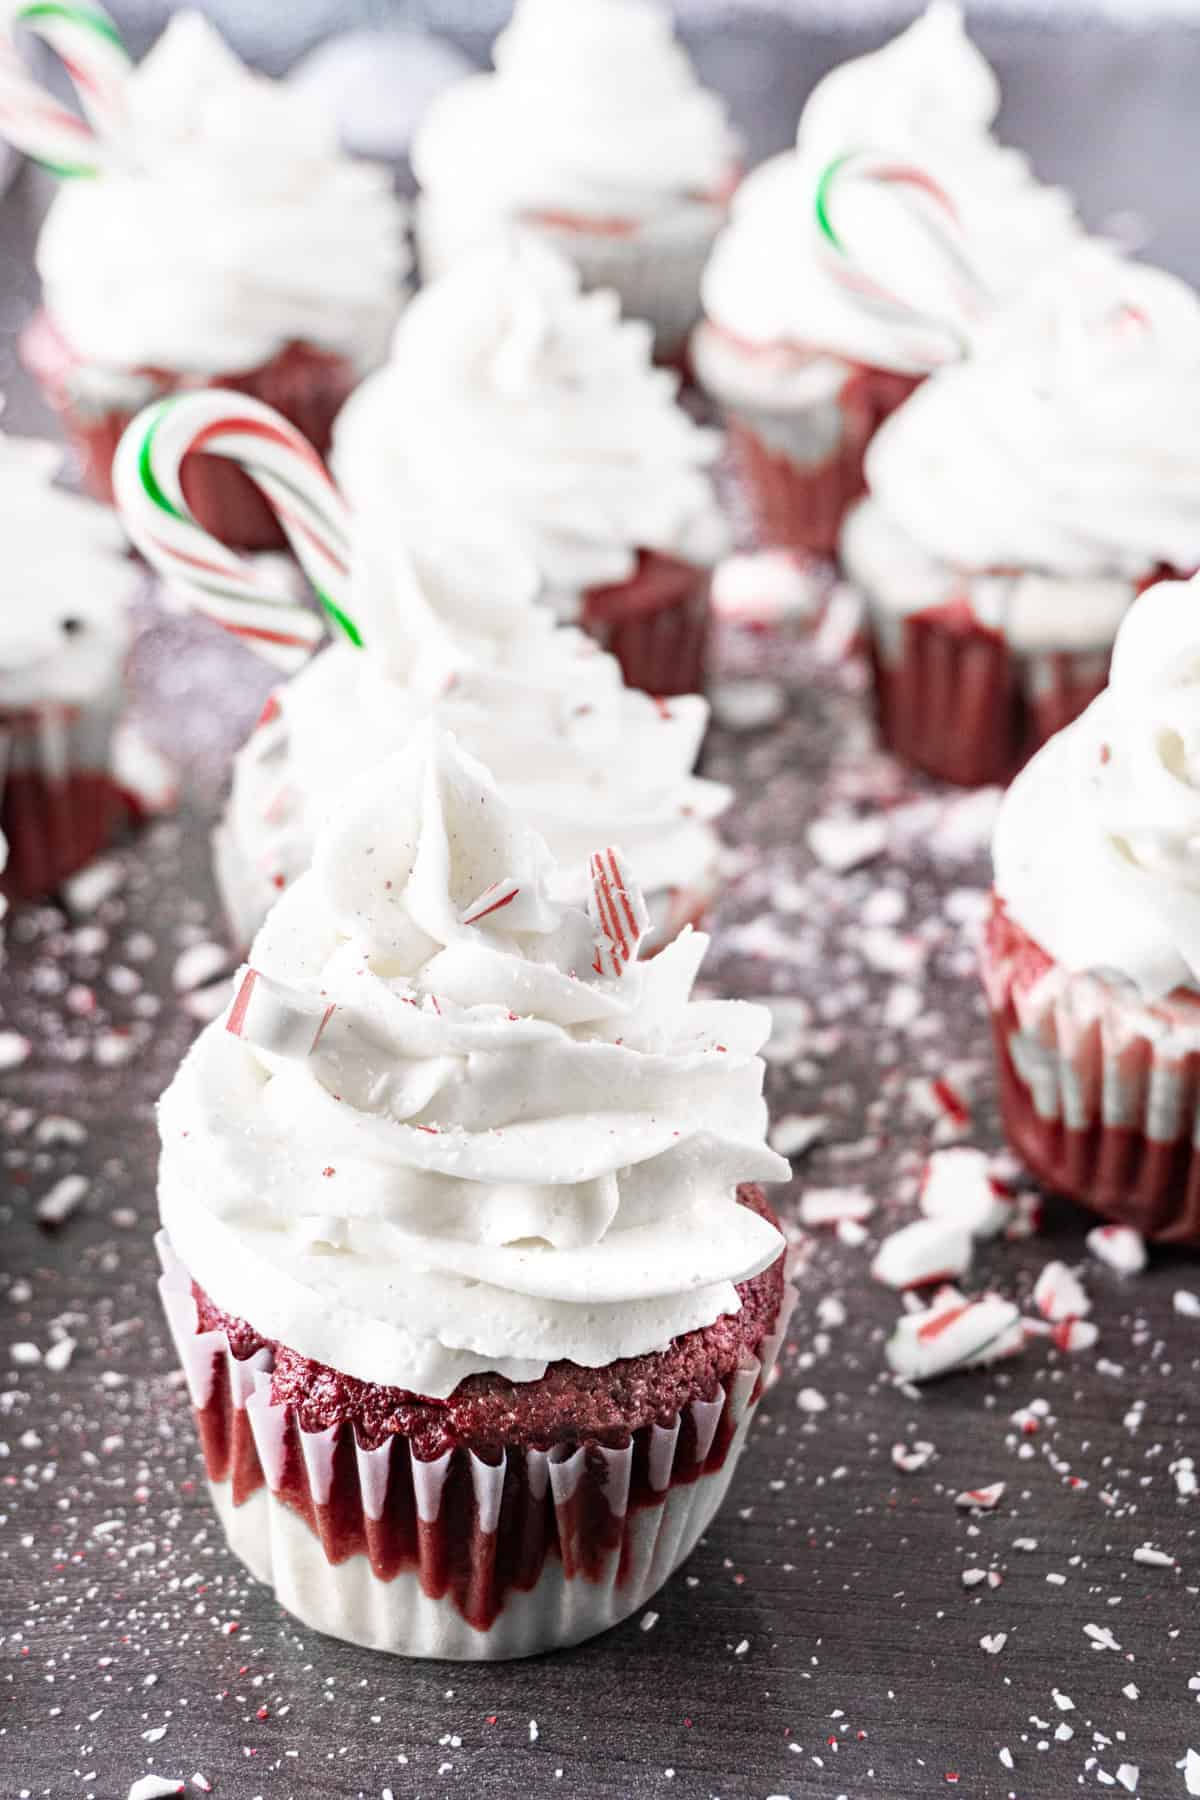 Peppermint cupcakes with crushed candy cane pieces